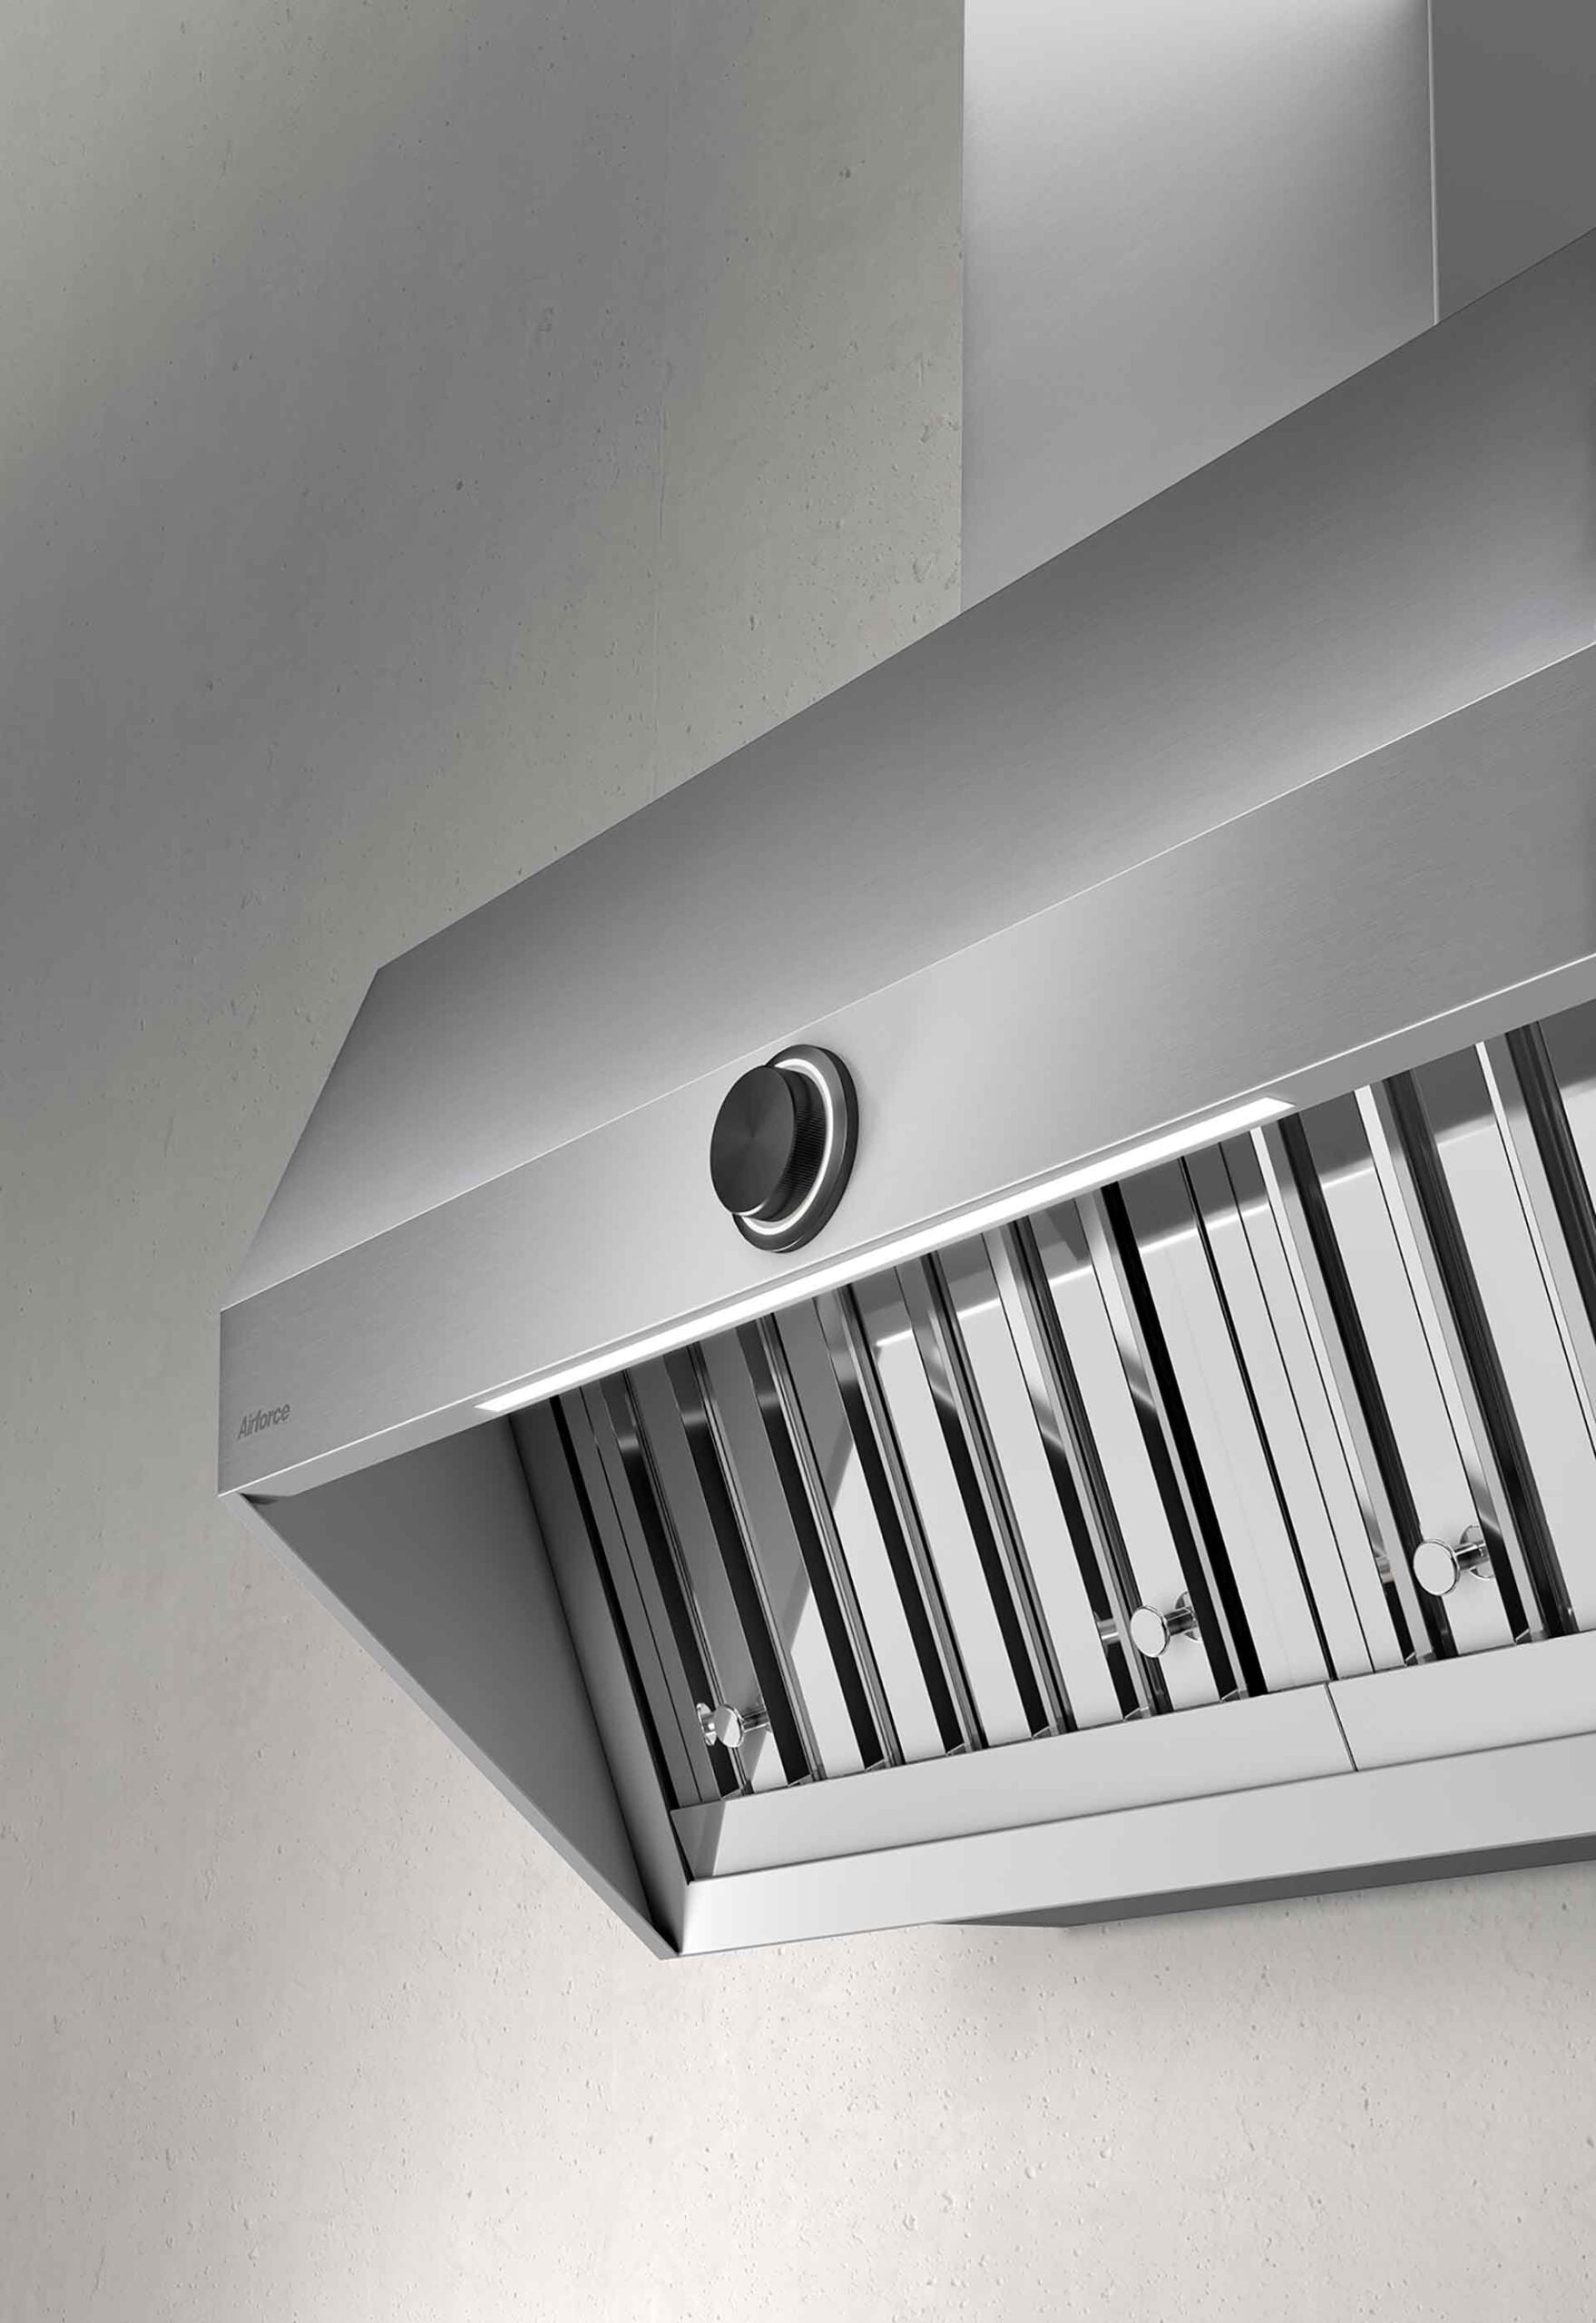 Airforce VIS Head 90cm Wall Mounted Cooker Hood with Non Drop System & Stainless Steel baffle grease filtering system